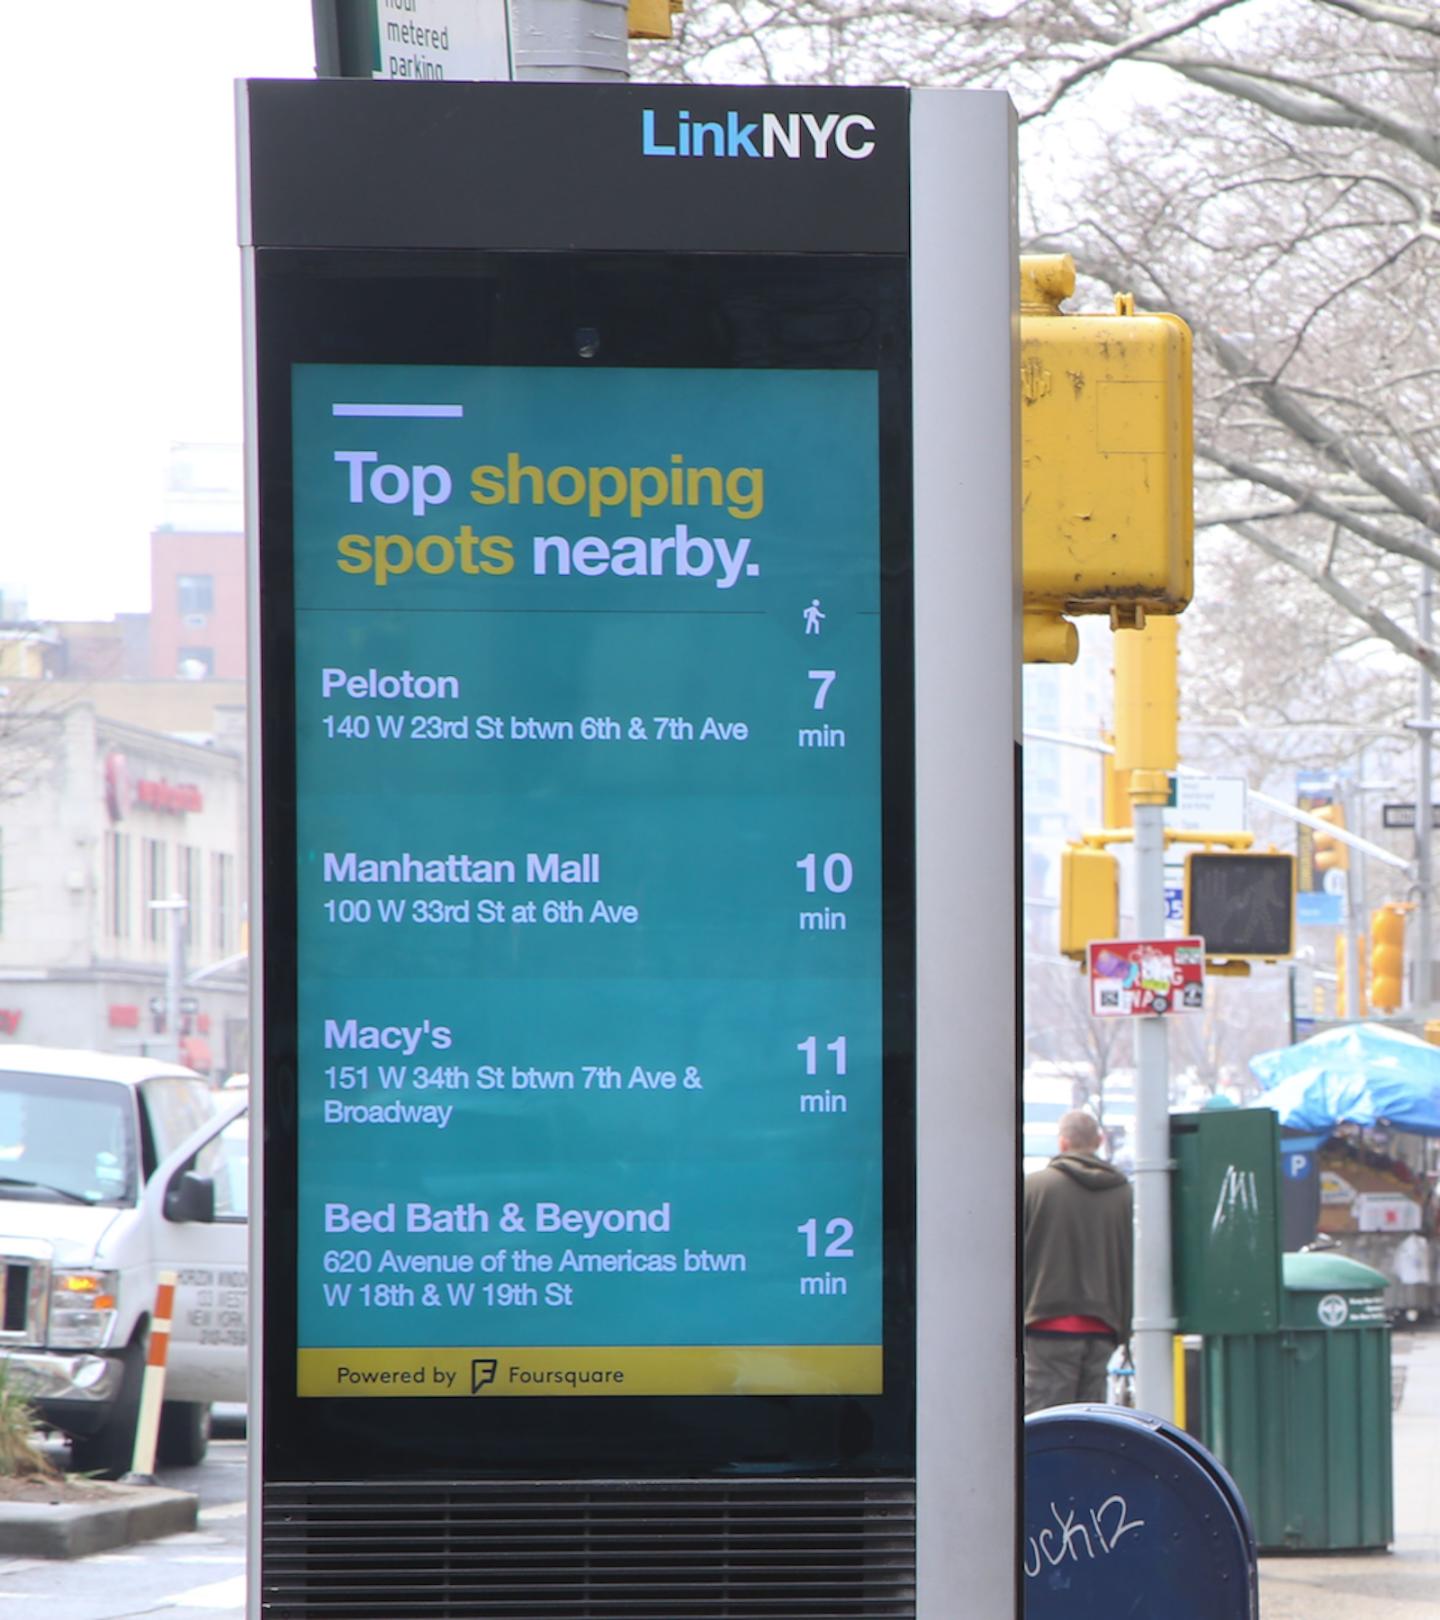 An Image of a digital board in NYC called "Link NYC". It is displaying a list of "Top Shopping spots nearby" which include Peloton, Manhattan Mall, Macy's and Bed Bath and Beyond with the prospective distance in minutes.